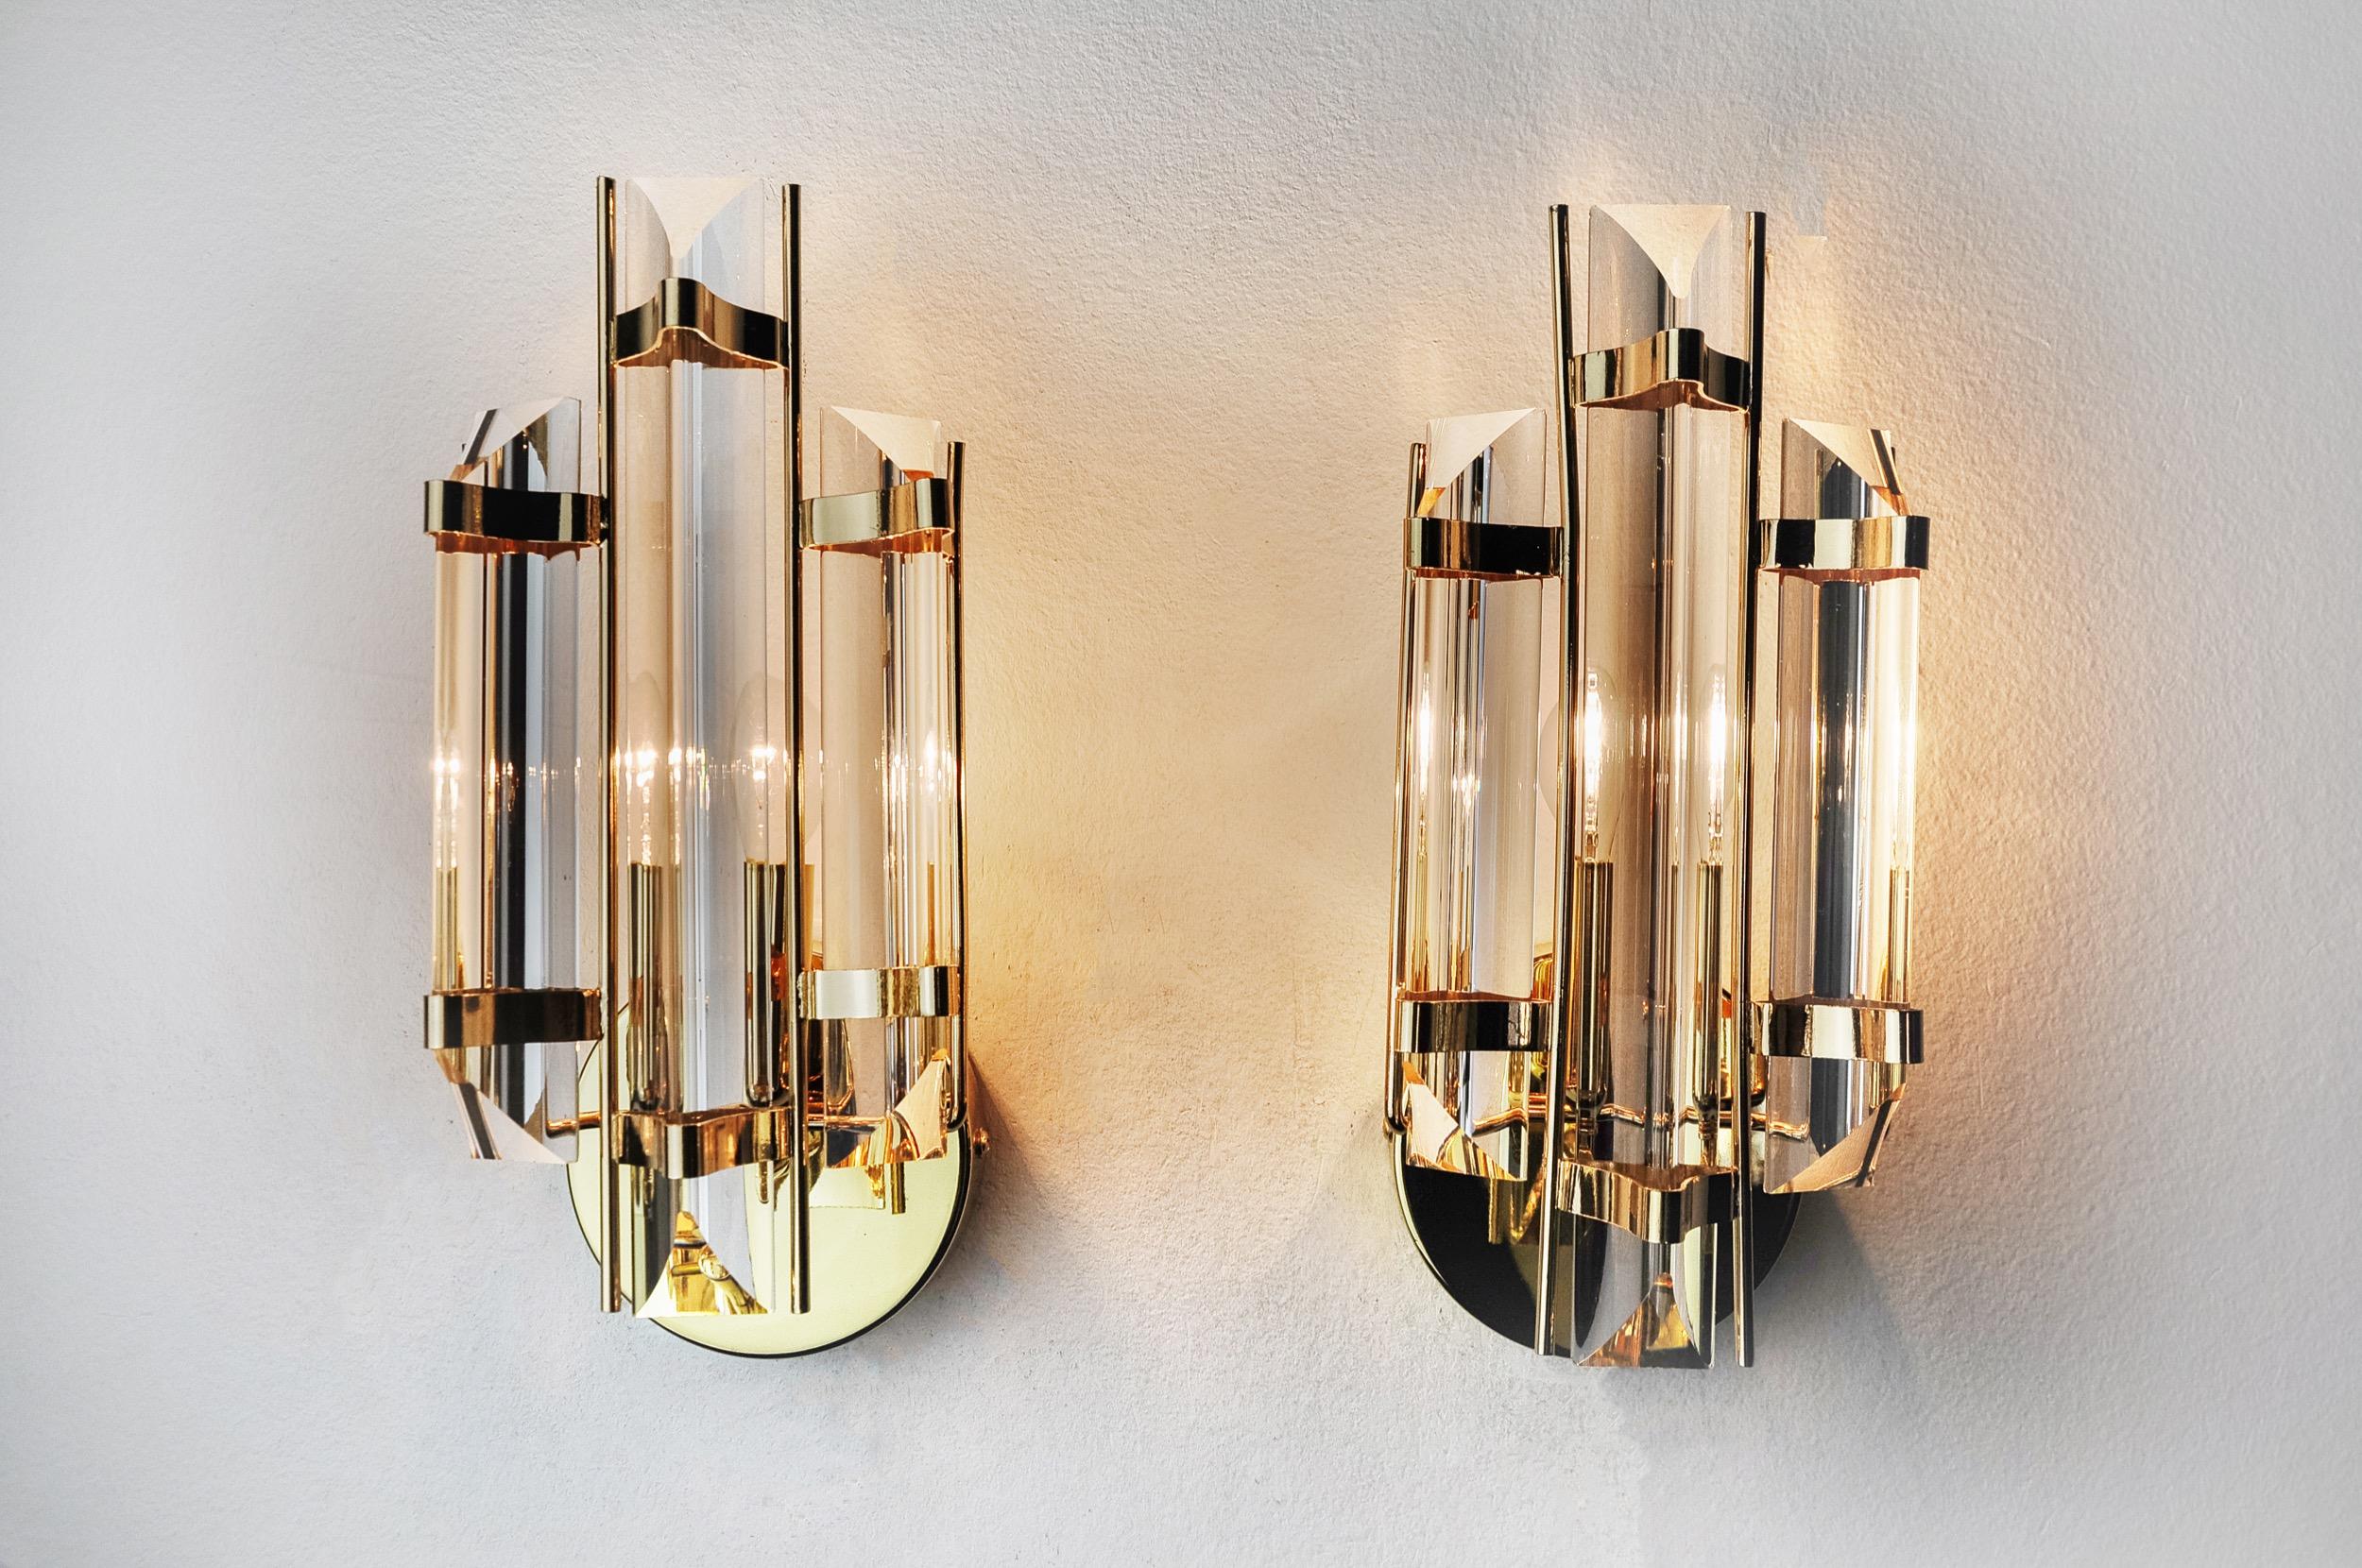 Very beautiful pair of Venini wall lights produced in Italy in the 70s. Cut glass and gold metal structure. Unique object that will illuminate wonderfully and bring a real designer touch to your interior. Electricity checked, time stamp consistent